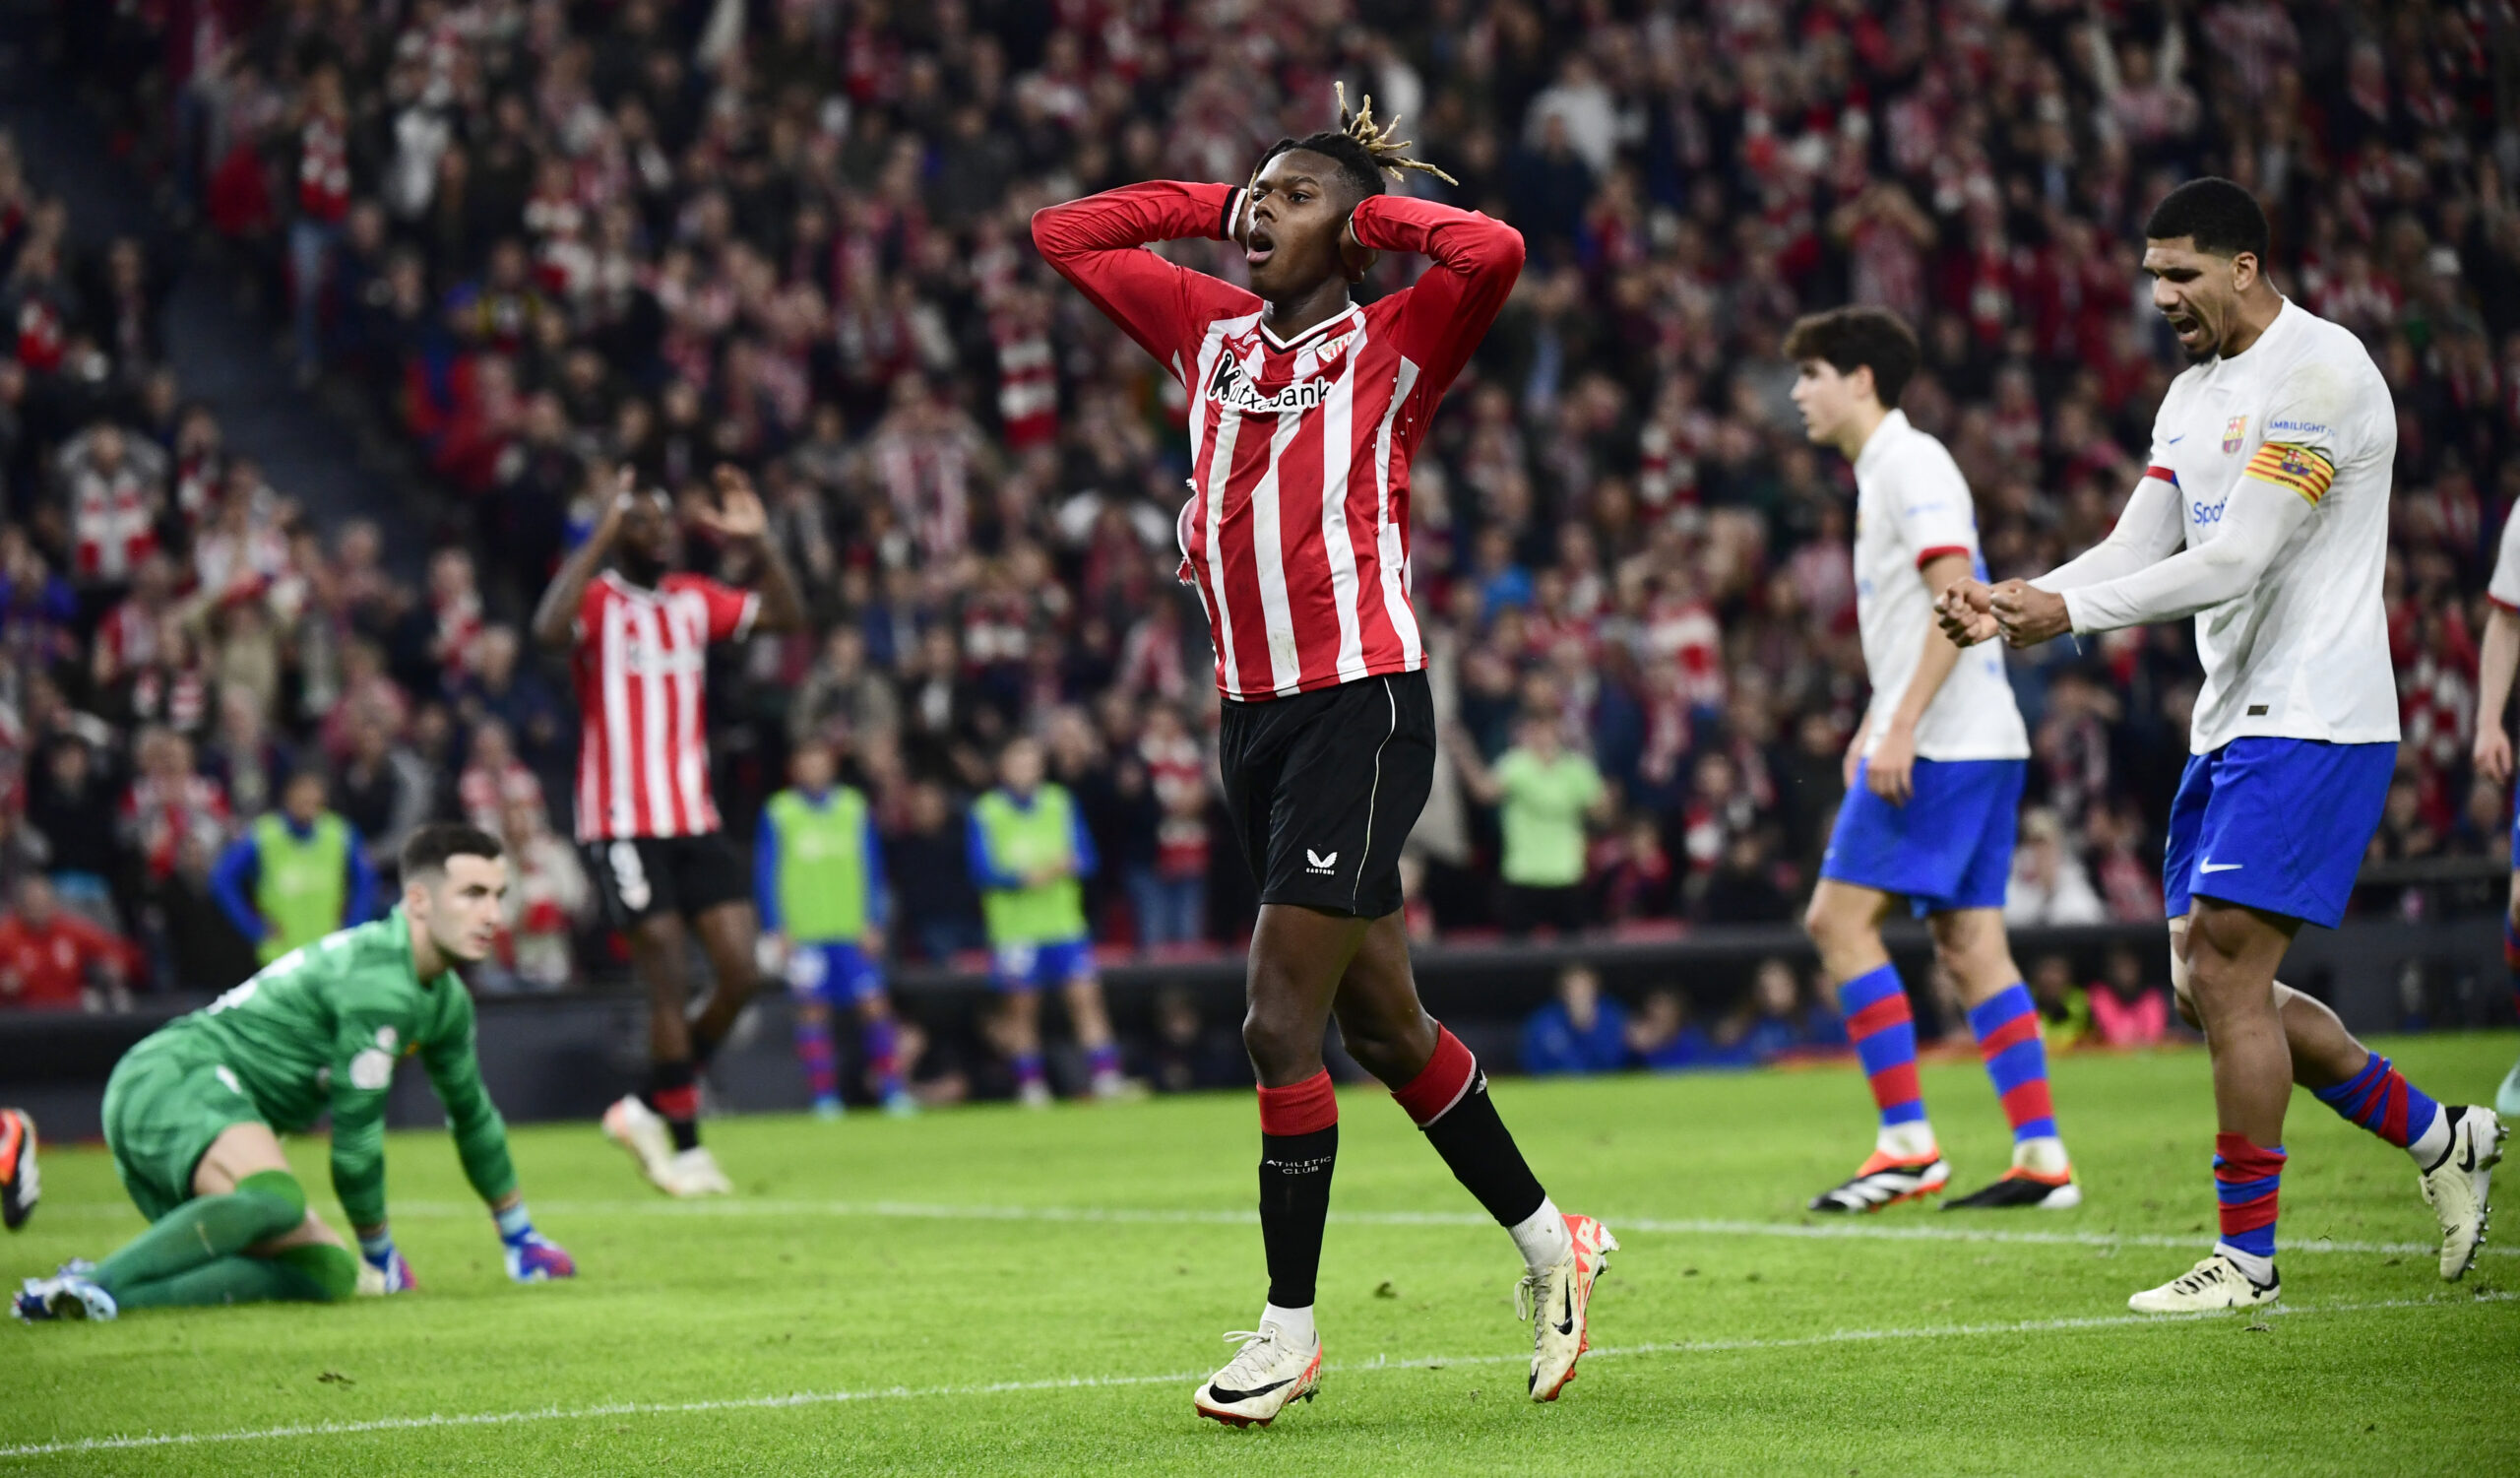 Athletic Bilbao's Spanish forward #11 Nico Williams reacts to missing a goal opportunity during the Spanish Copa del Rey (King's Cup) quarter final football match between Athletic Club Bilbao and FC Barcelona at the San Mames stadium in Bilbao on January 24, 2024.